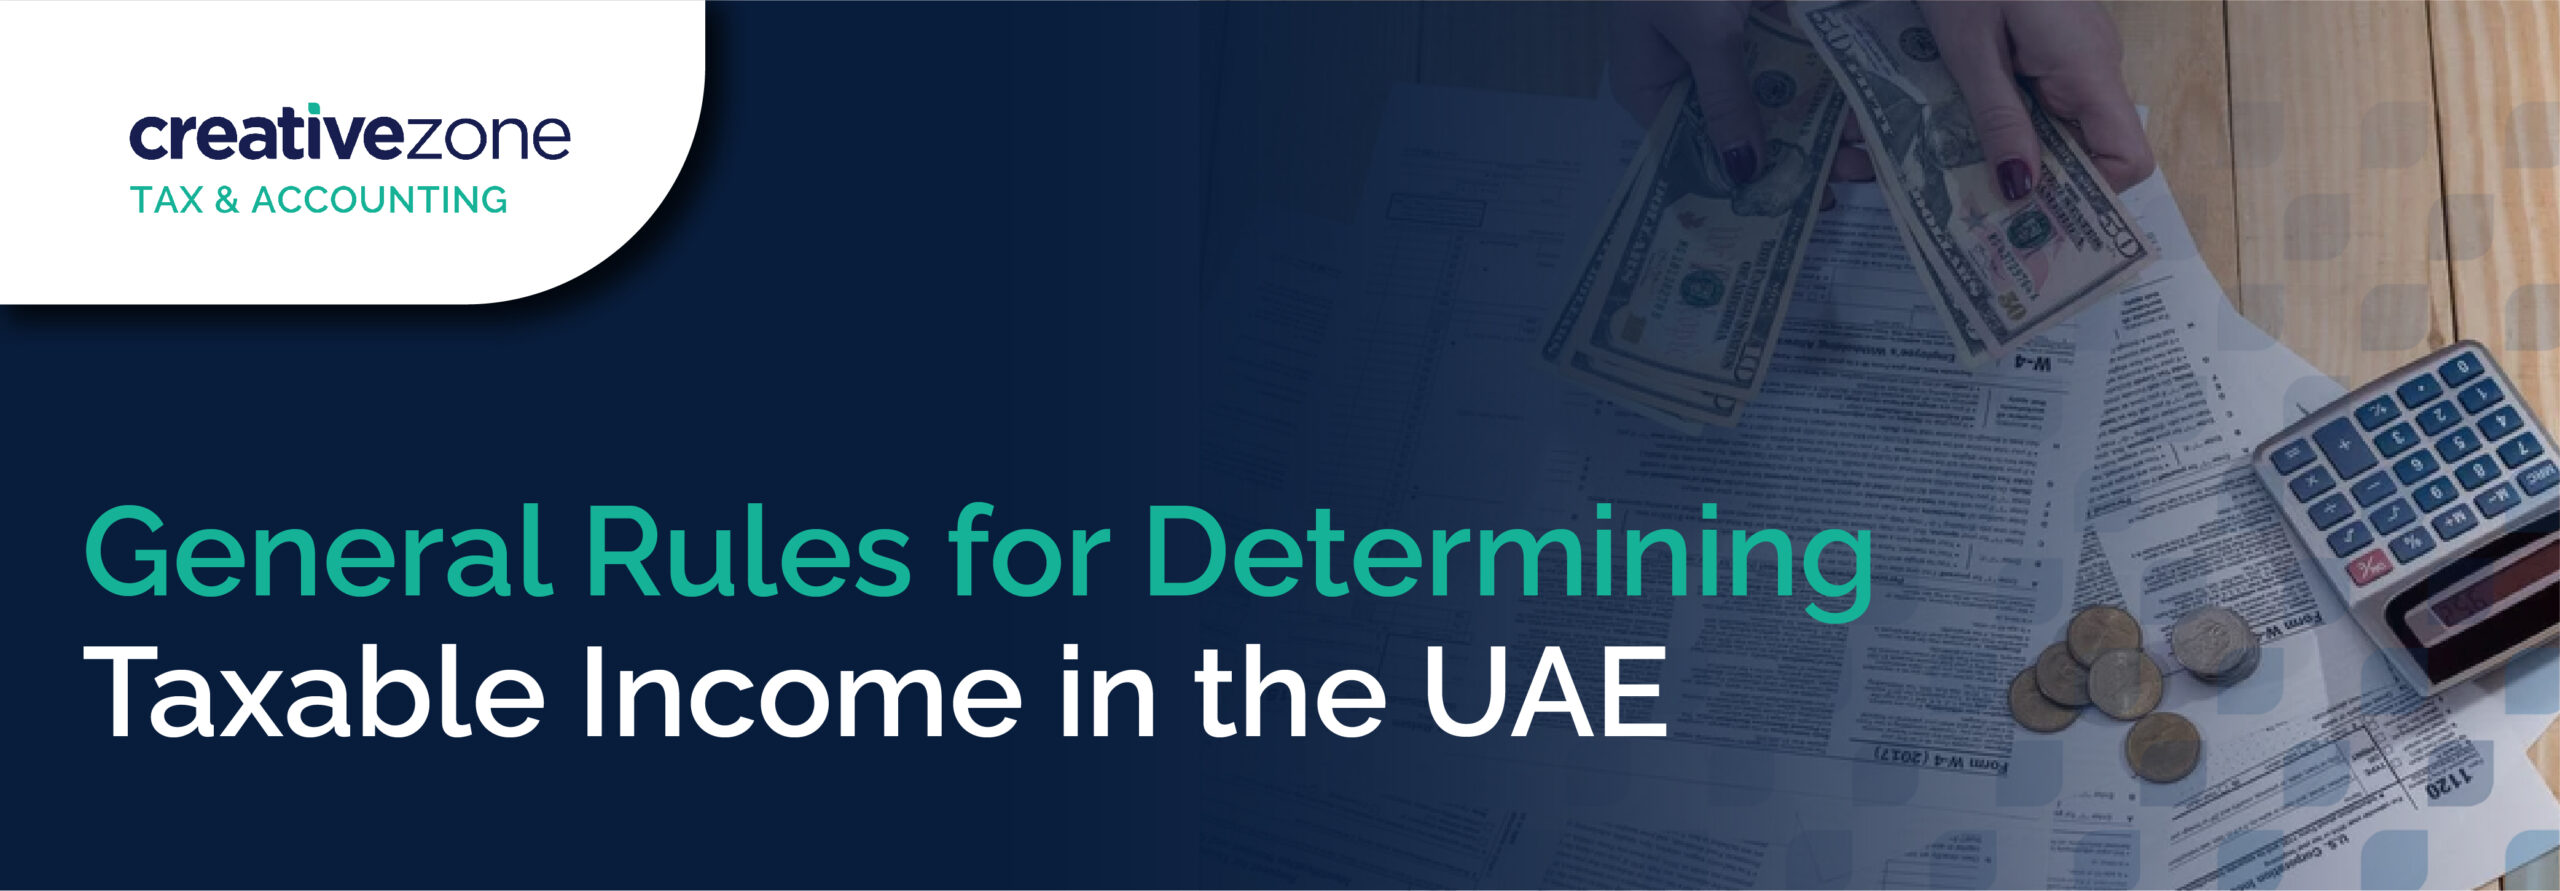 General Rules for Determining Taxable Income in the UAE